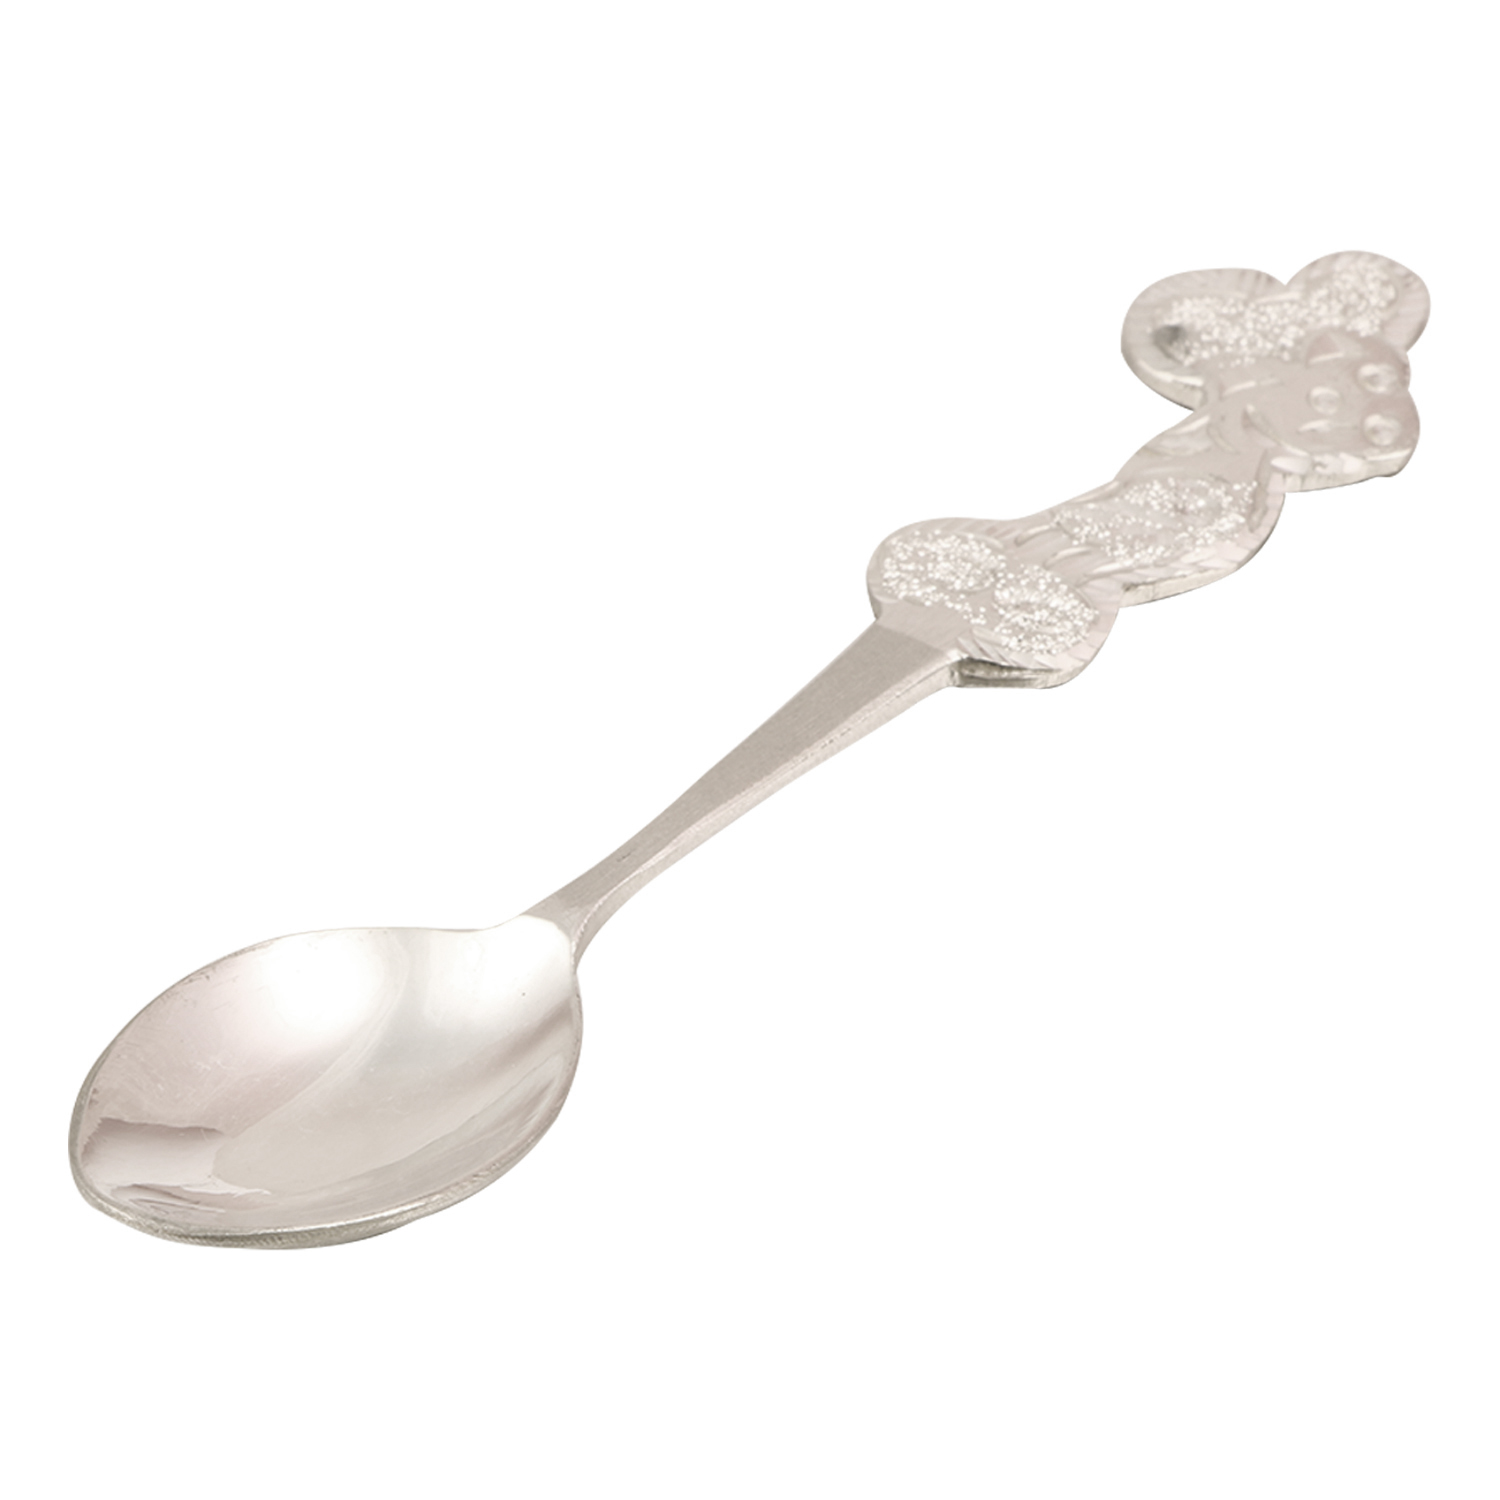 Osasbazaar Sterling Silver Baby Spoon - Mickey Mouse Design - Main